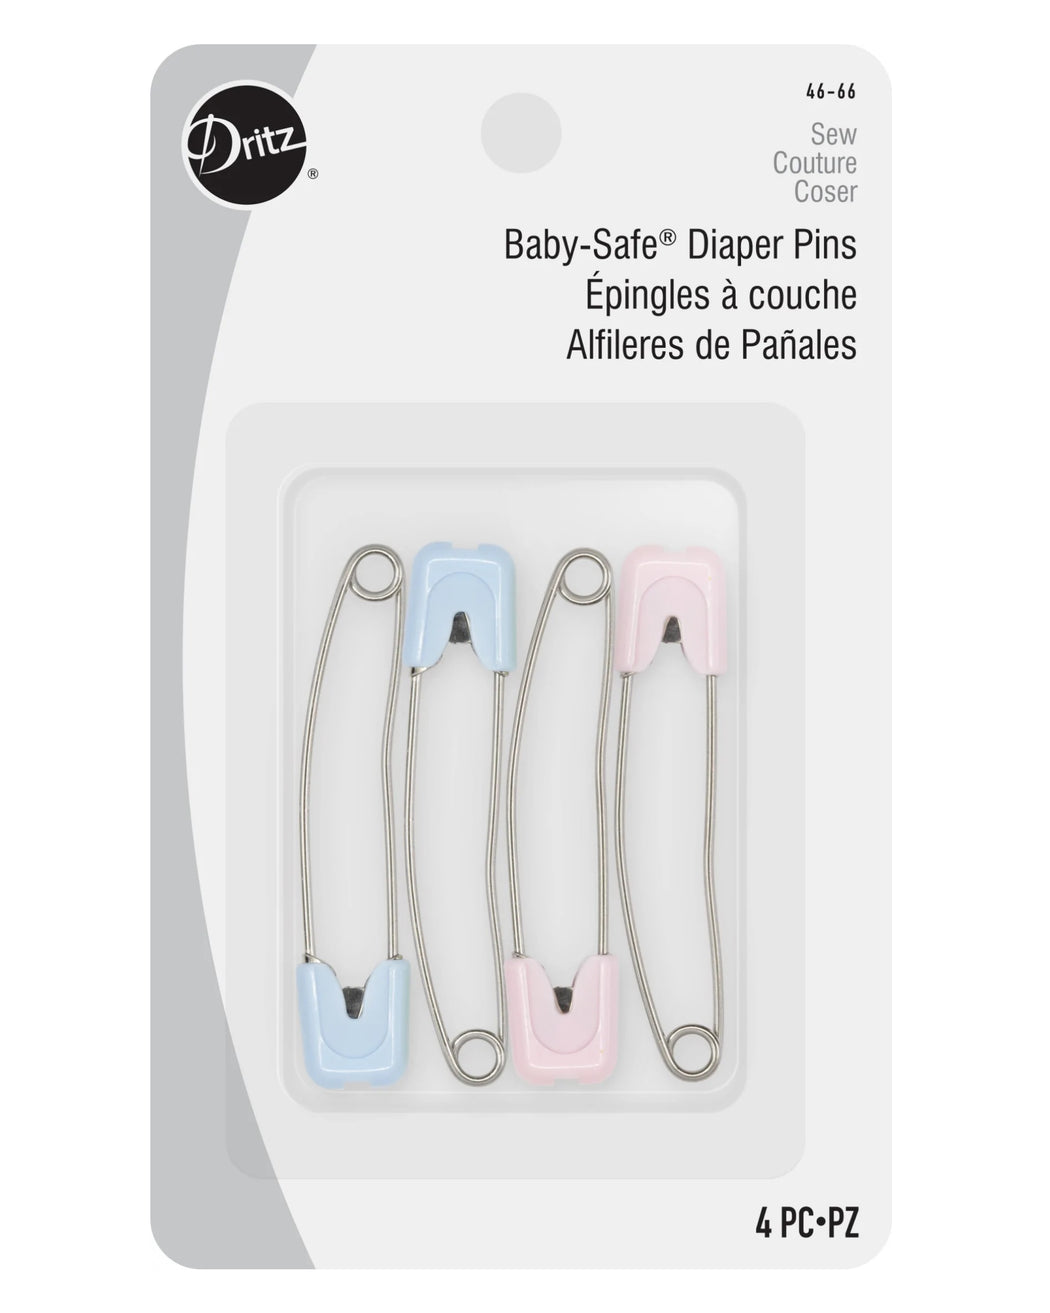 Baby-Safe Diaper Pins - Zipper and Thread